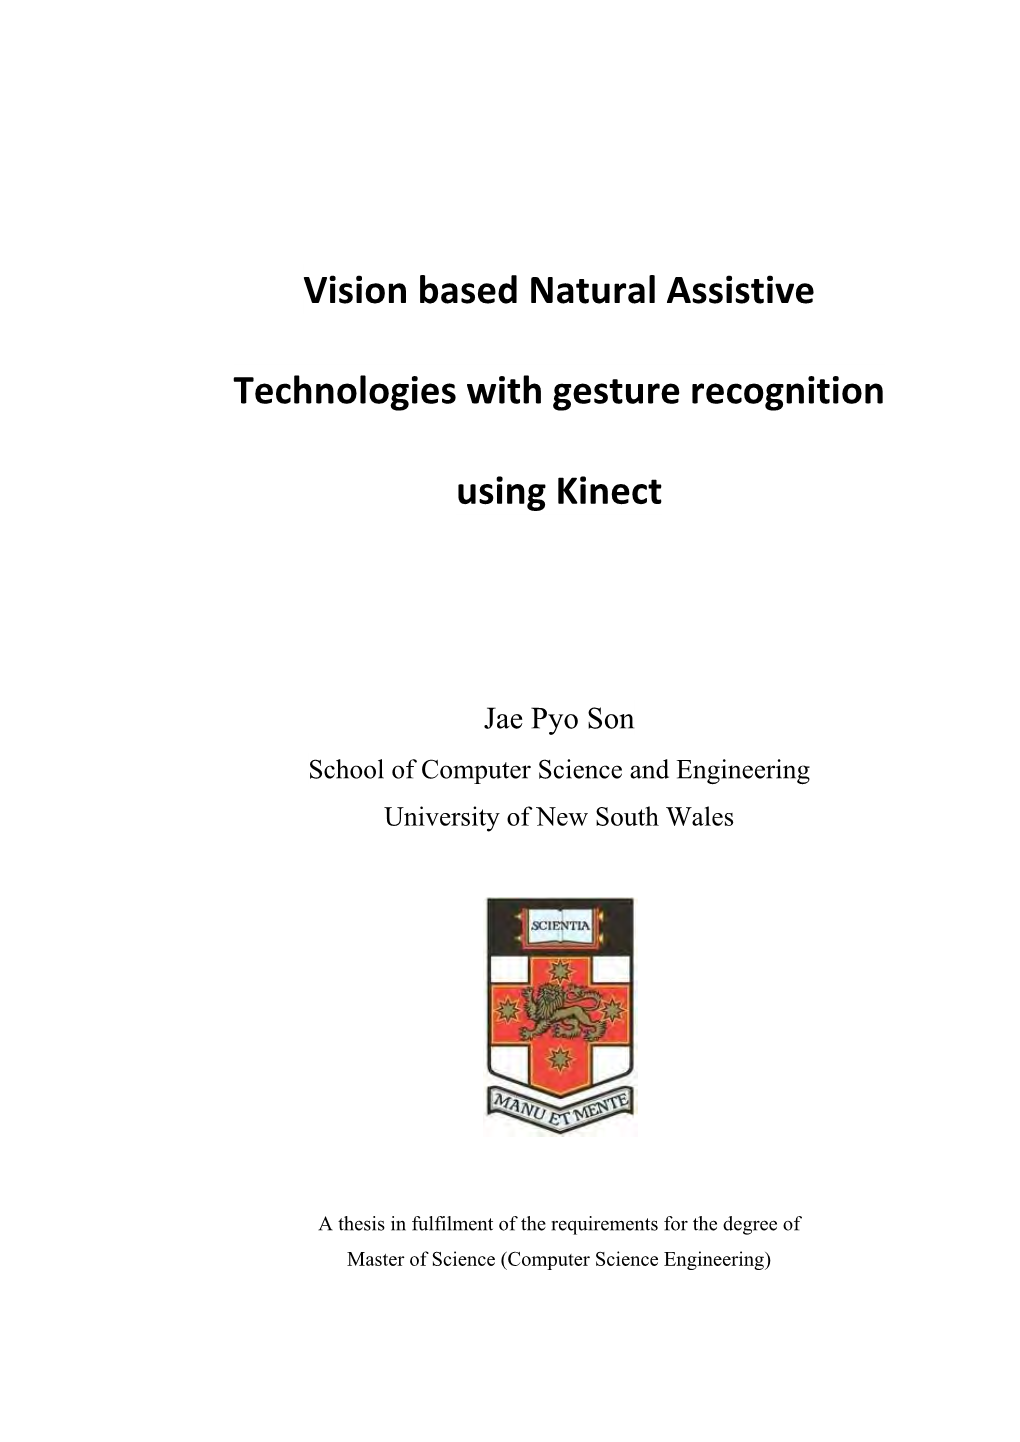 Vision Based Natural Assistive Technologies with Gesture